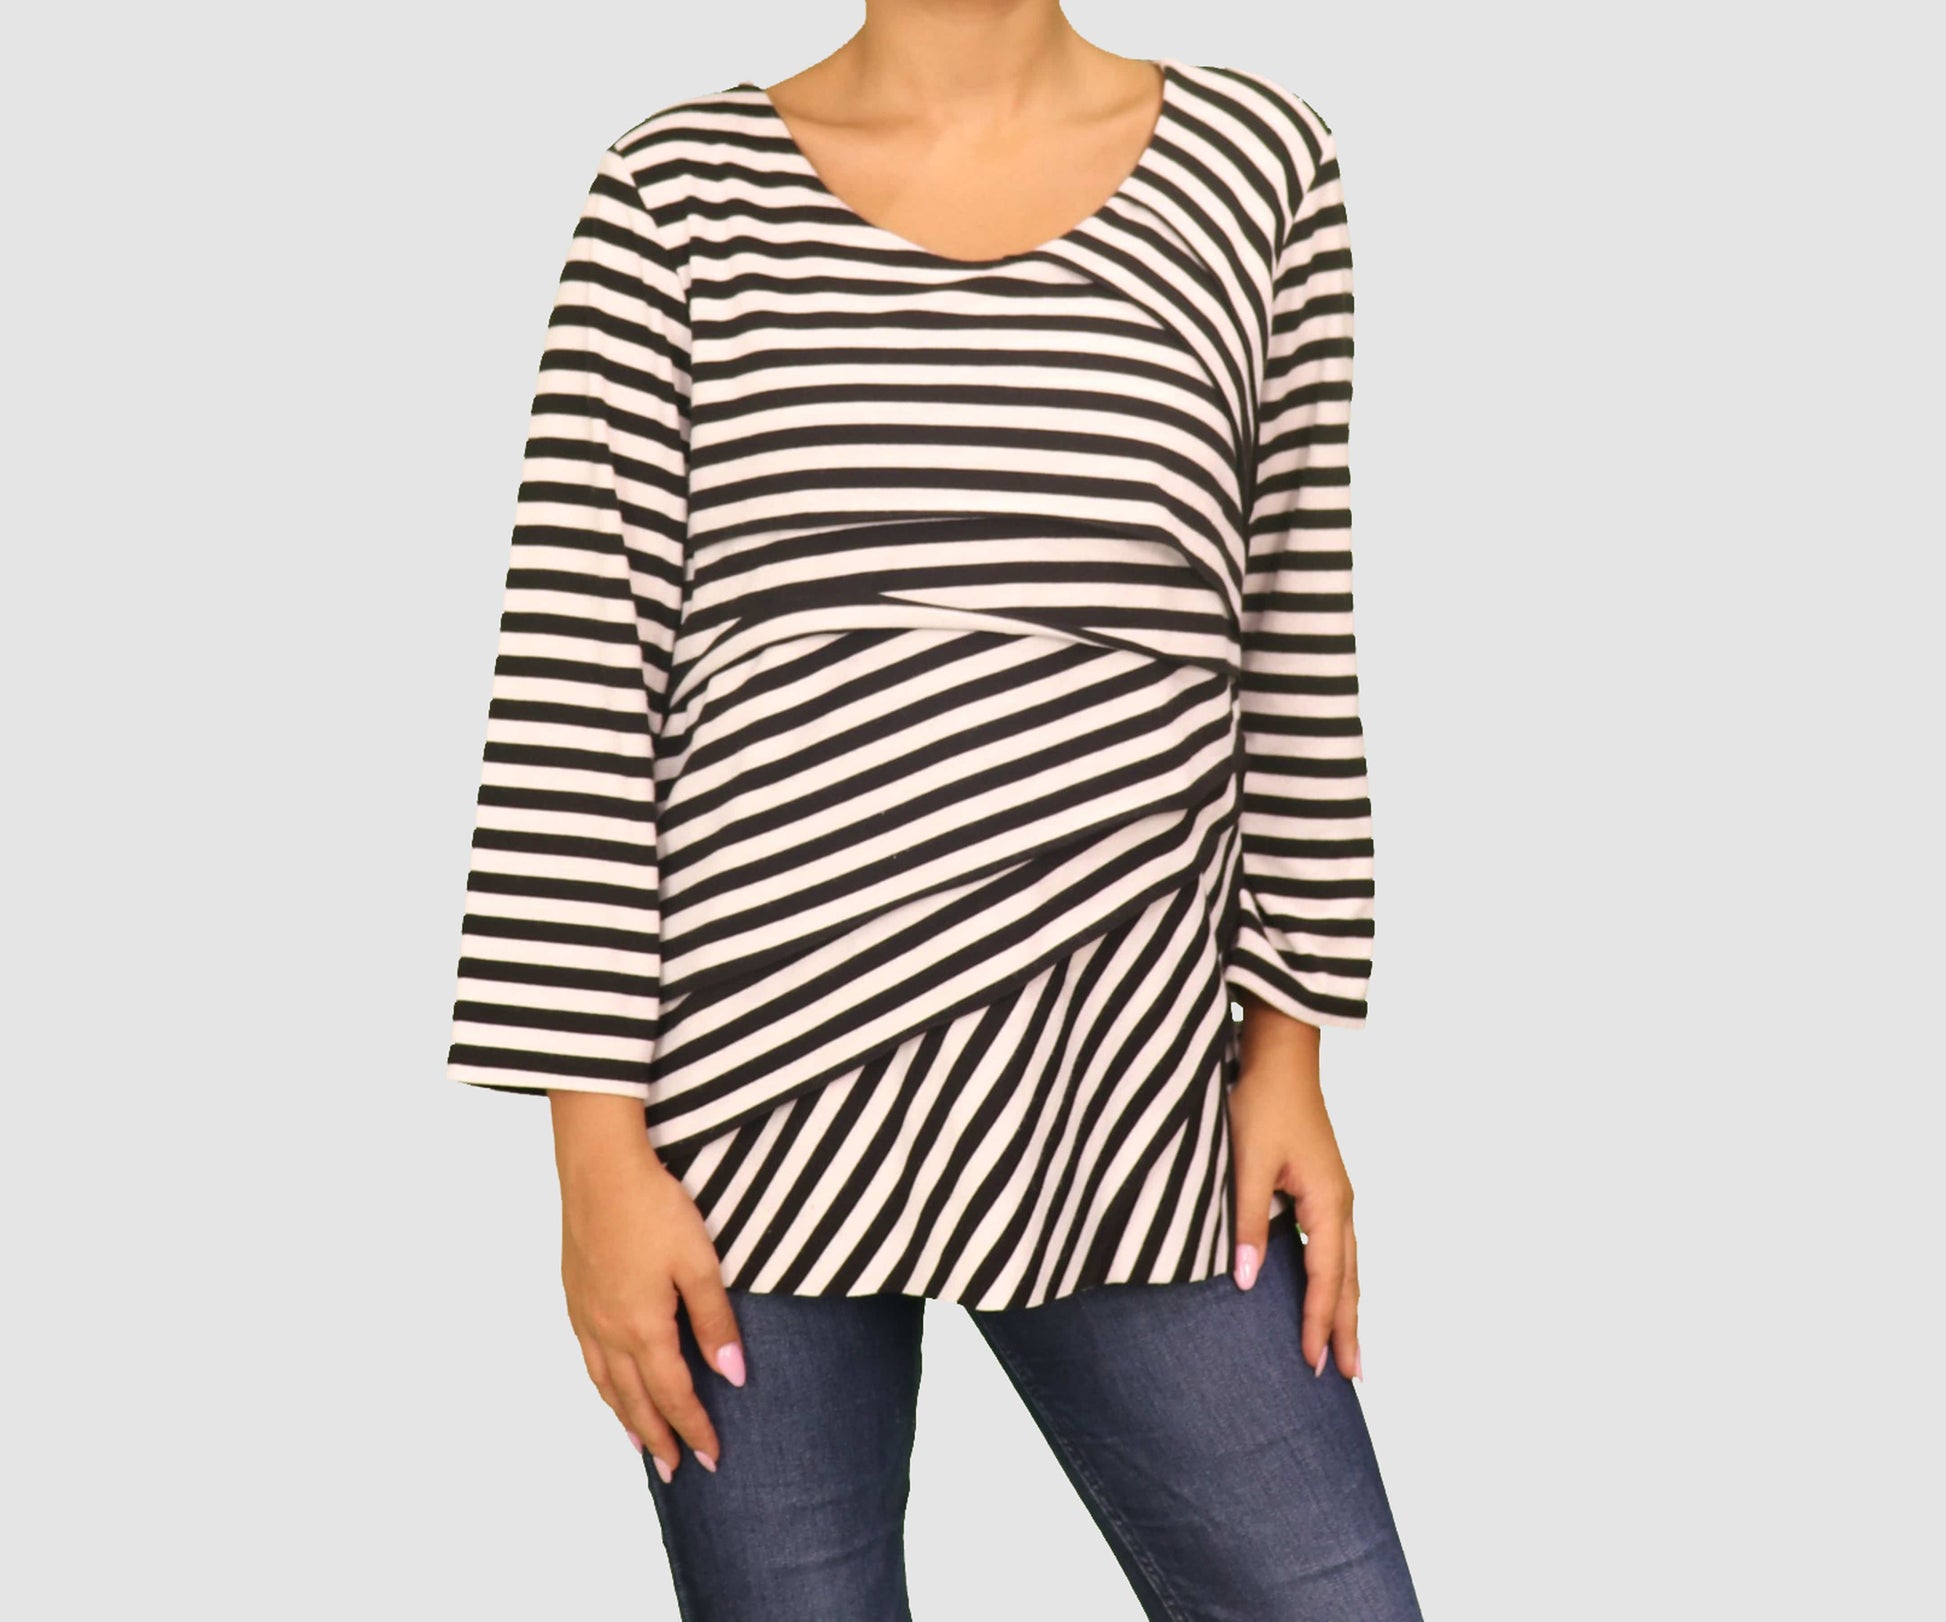 CHICO'S Womens Tops X-Large / Black/ White Long Sleeve Top